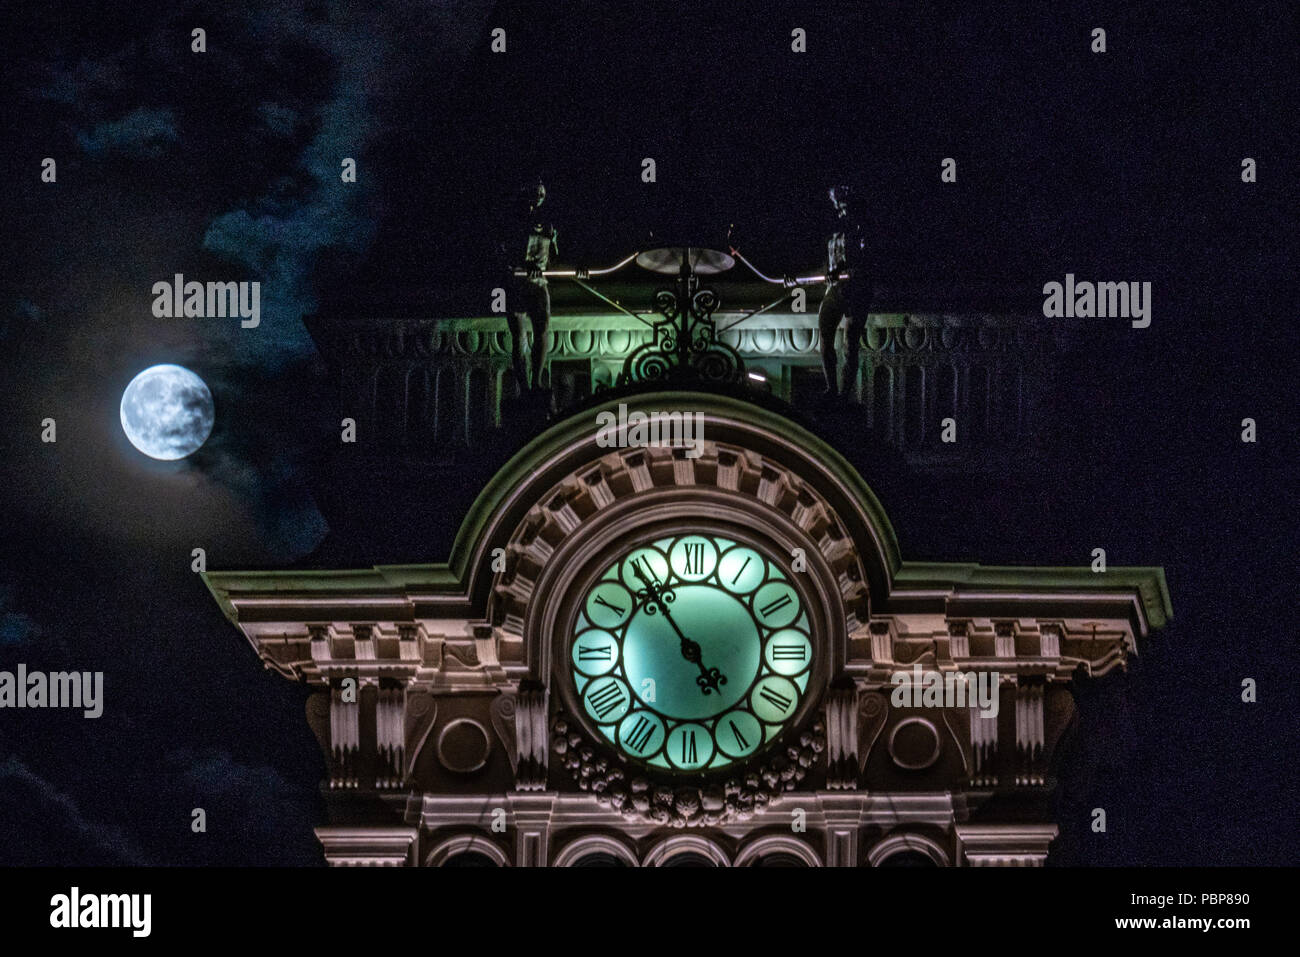 Trieste, Italy, 28 July 2018.  The full moon appears from the clouds behind the top of Trieste's City Hall in Piazza Unità d'Italia. The figures that  Stock Photo